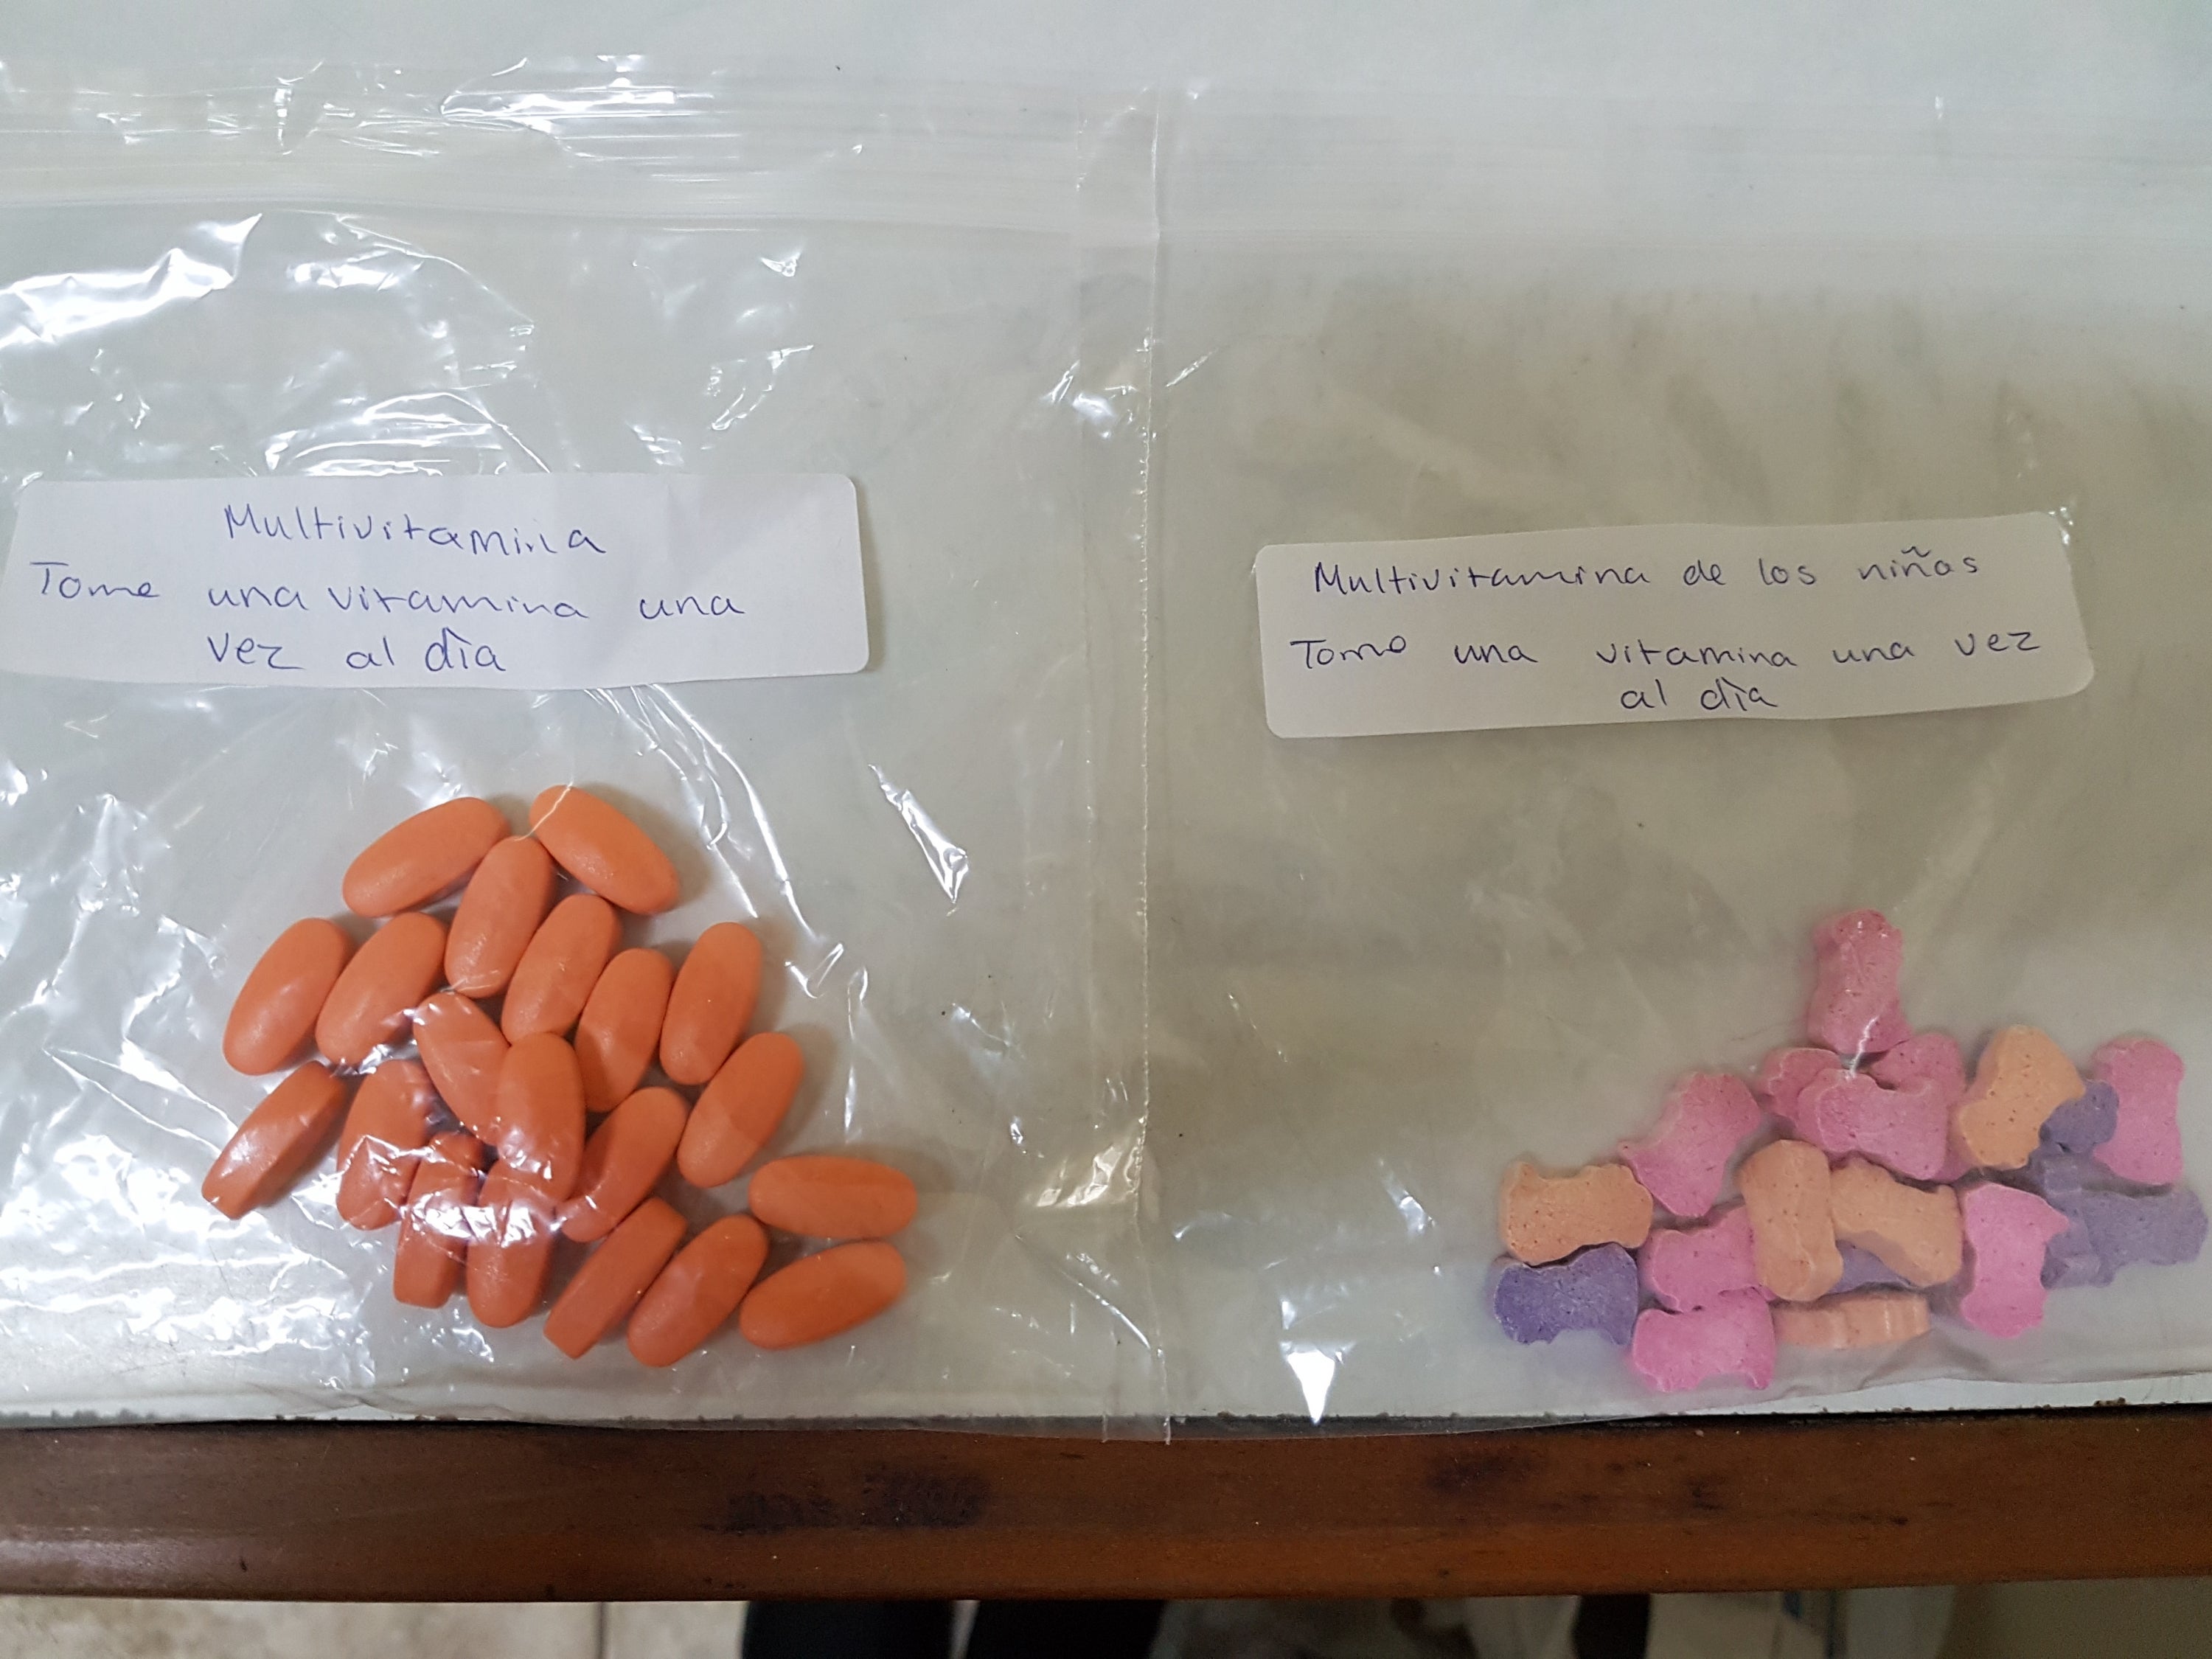 Bags of medication